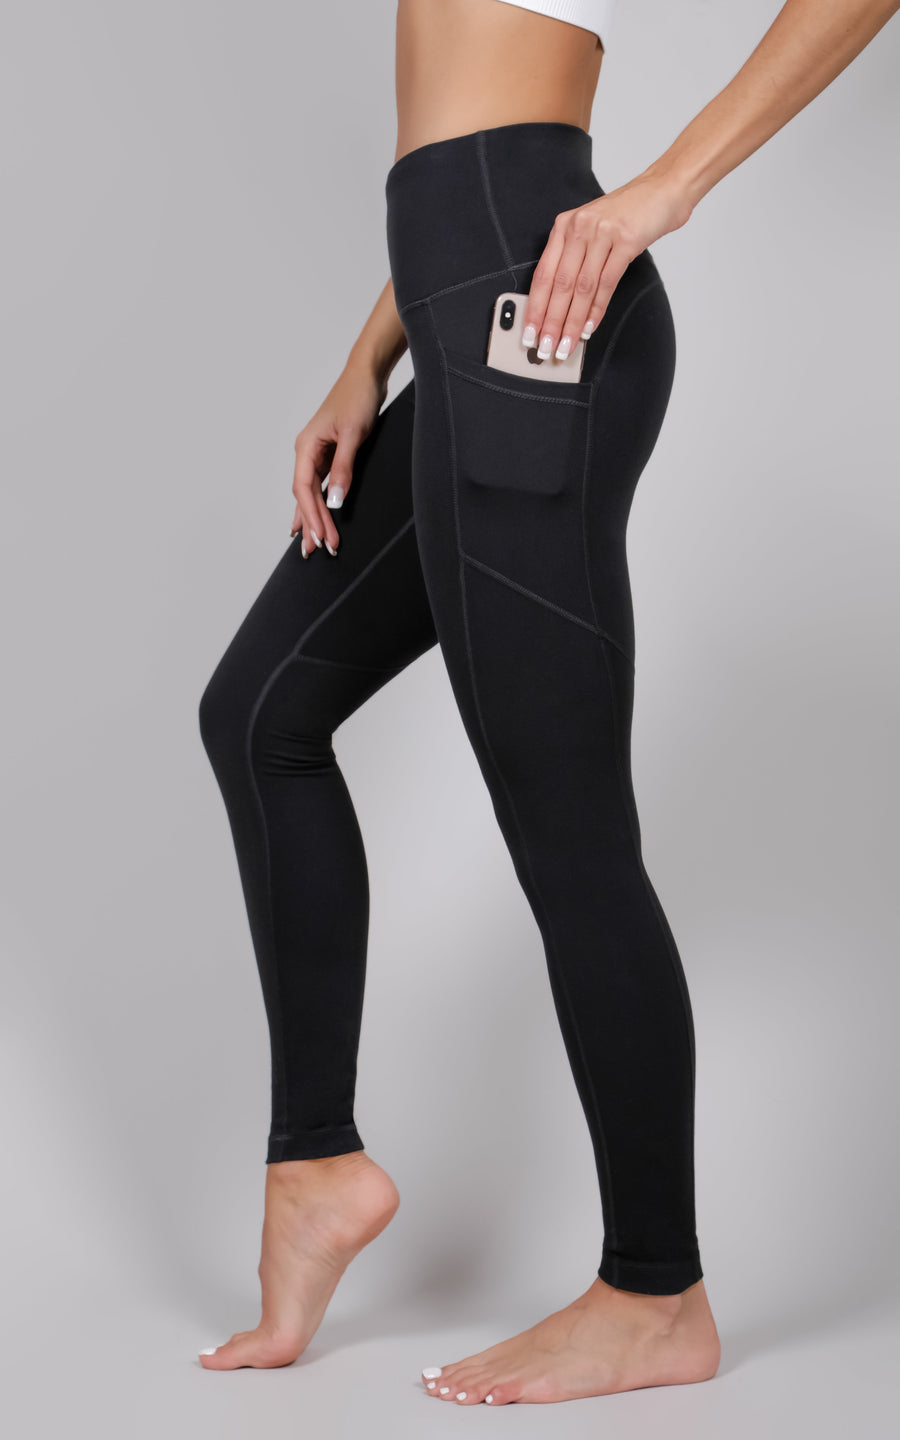 High Waist Legging with Side Pockets and Mesh Insert